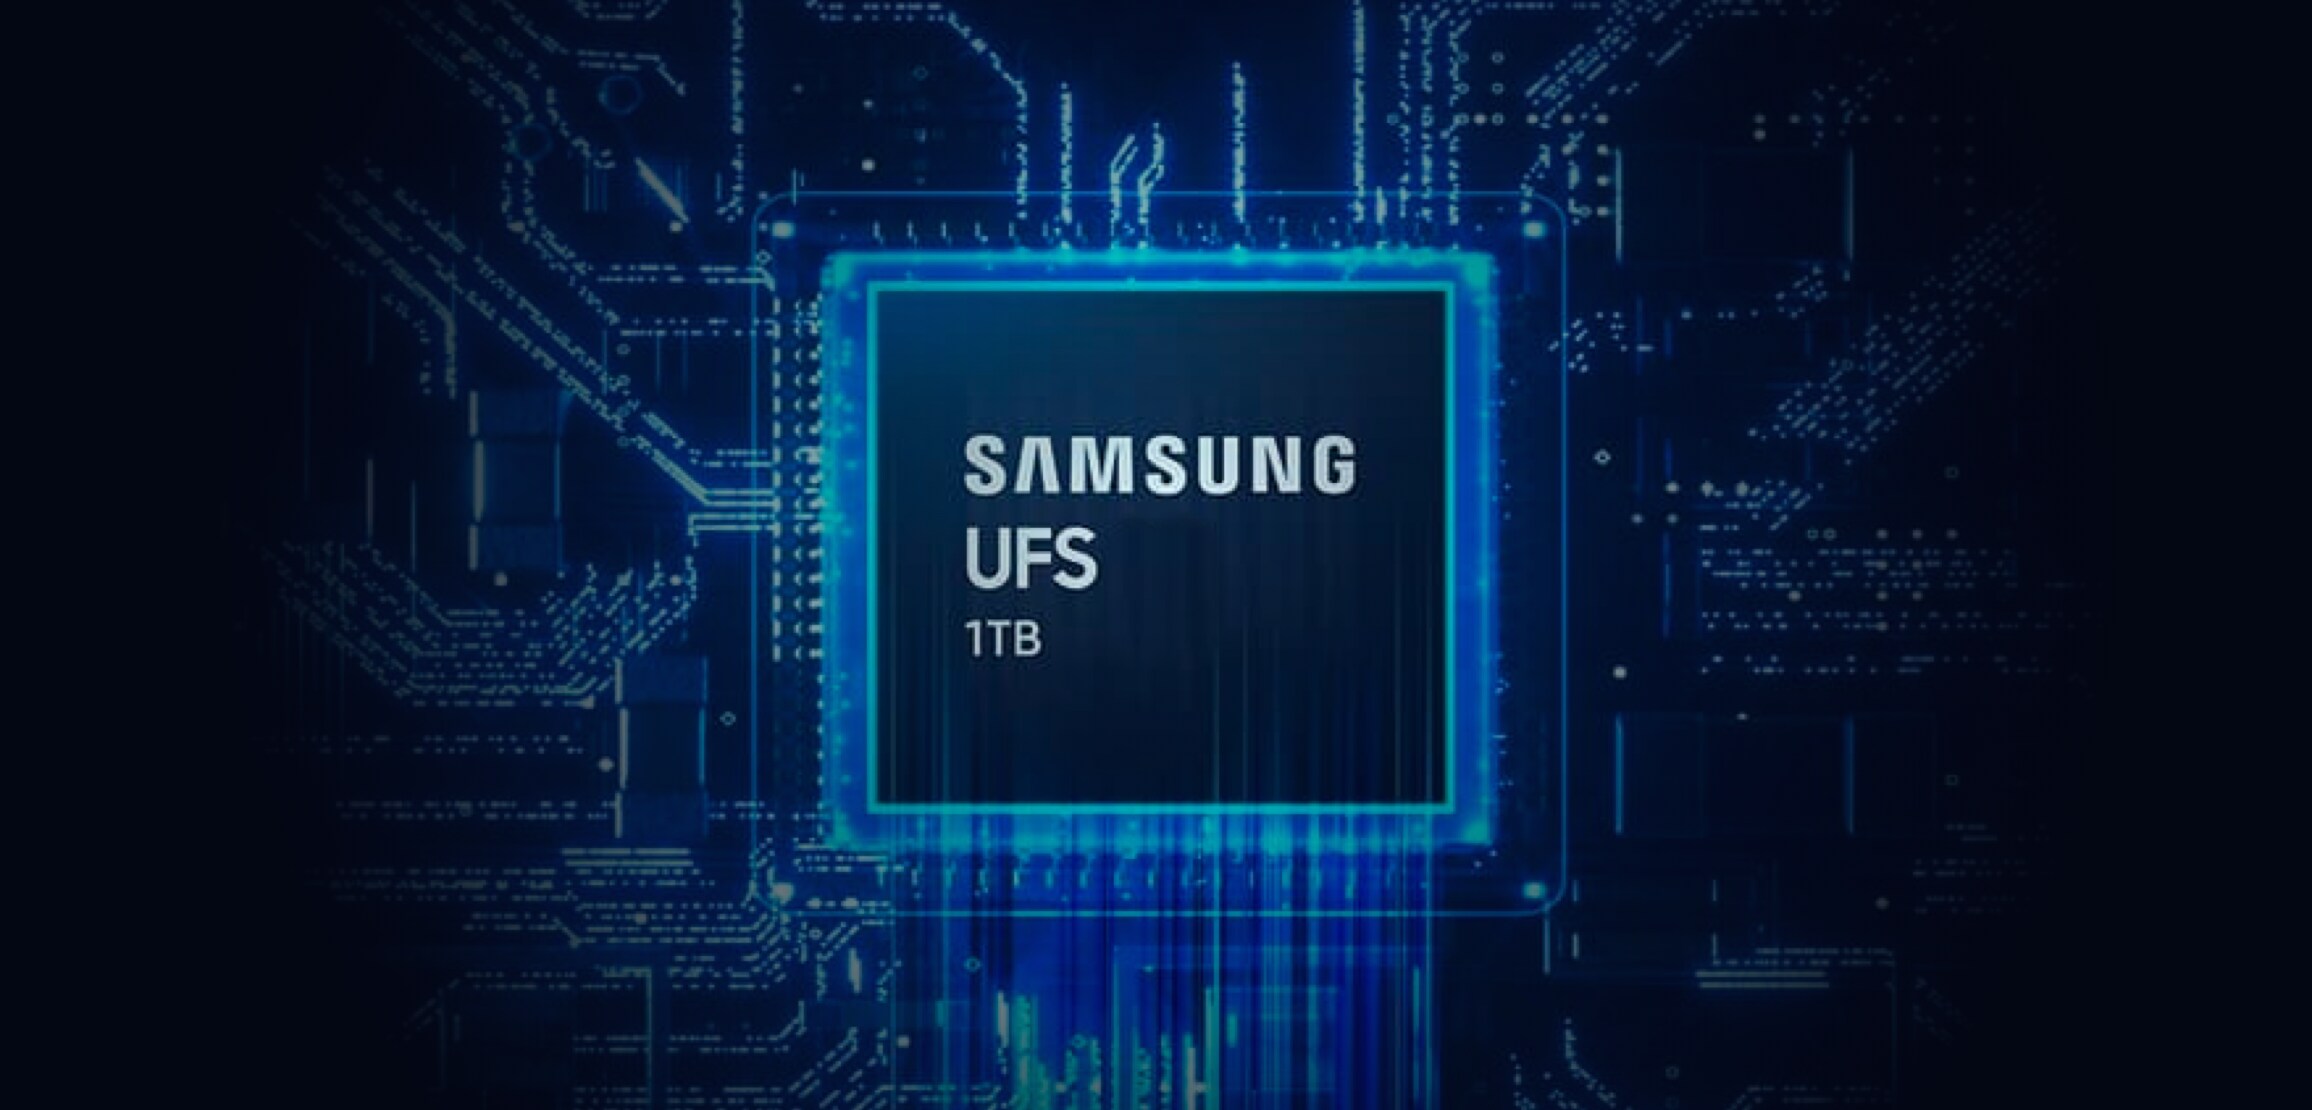 Samsung's UFS 3.0 enhances movie downloads, multitasking, and IoT connectivity, offering speeds up to 4x faster than SATA SSDs with sequential read/write capabilities of 2,100/900MB/s.